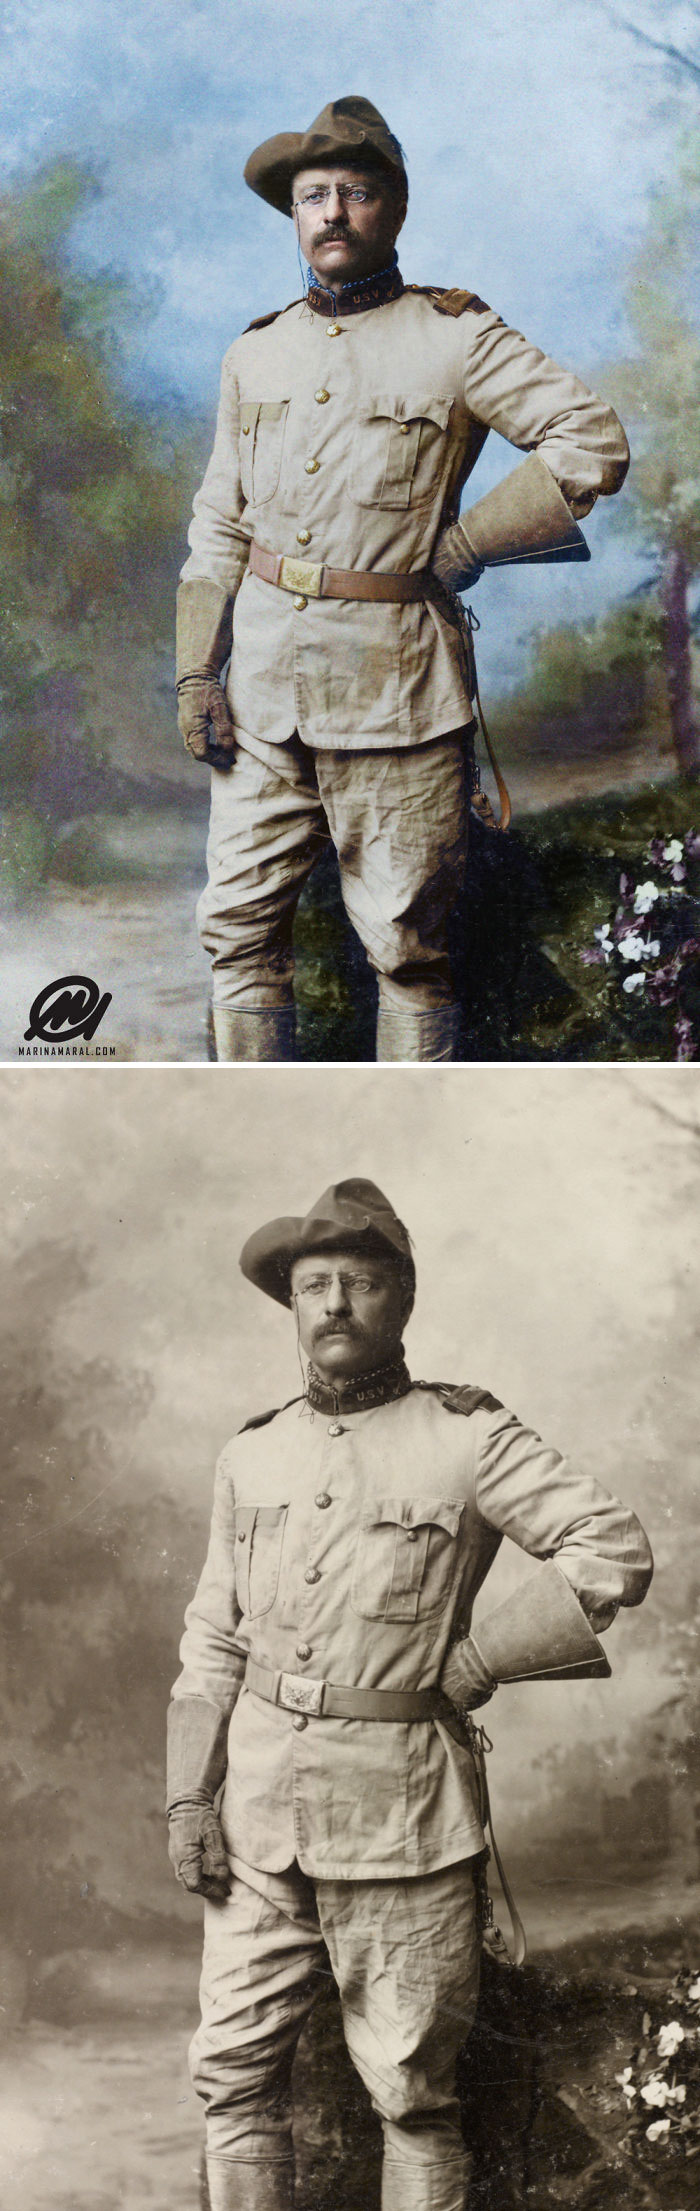 President Theodore Roosevelt In His Rough Riders Uniform With His Signature Blue Polka-Dotted Scarf, 26 October 1898